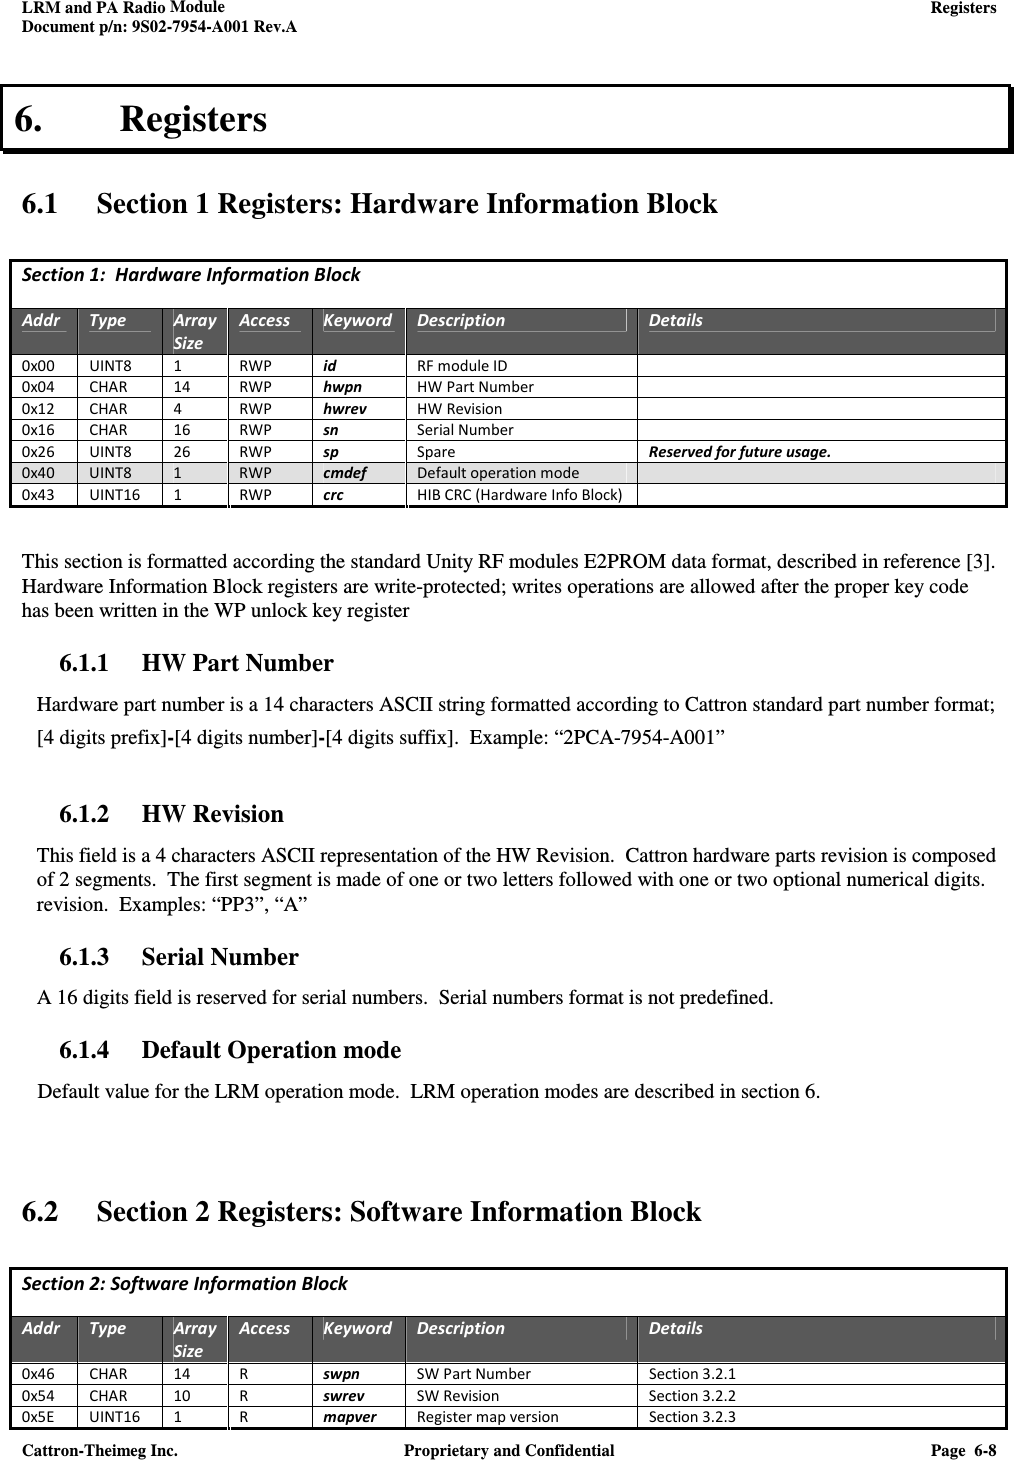 LRM and PA Radio Module    Registers  Document p/n: 9S02-7954-A001 Rev.A  Cattron-Theimeg Inc.  Proprietary and Confidential  Page  6-8  6. Registers  6.1 Section 1 Registers: Hardware Information Block  Section 1:  Hardware Information Block   Addr  Type  Array Size Access  Keyword  Description  Details 0x00  UINT8  1  RWP  id  RF module ID   0x04  CHAR  14  RWP  hwpn  HW Part Number   0x12  CHAR  4  RWP  hwrev  HW Revision   0x16  CHAR  16  RWP  sn  Serial Number   0x26  UINT8  26  RWP  sp  Spare  Reserved for future usage. 0x40  UINT8  1  RWP  cmdef  Default operation mode   0x43  UINT16  1  RWP  crc  HIB CRC (Hardware Info Block)    This section is formatted according the standard Unity RF modules E2PROM data format, described in reference [3].  Hardware Information Block registers are write-protected; writes operations are allowed after the proper key code has been written in the WP unlock key register 6.1.1 HW Part Number Hardware part number is a 14 characters ASCII string formatted according to Cattron standard part number format; [4 digits prefix]-[4 digits number]-[4 digits suffix].  Example: “2PCA-7954-A001”  6.1.2 HW Revision This field is a 4 characters ASCII representation of the HW Revision.  Cattron hardware parts revision is composed of 2 segments.  The first segment is made of one or two letters followed with one or two optional numerical digits.   revision.  Examples: “PP3”, “A” 6.1.3 Serial Number A 16 digits field is reserved for serial numbers.  Serial numbers format is not predefined. 6.1.4 Default Operation mode    Default value for the LRM operation mode.  LRM operation modes are described in section 6.   6.2 Section 2 Registers: Software Information Block  Section 2: Software Information Block  Addr  Type  Array Size Access  Keyword  Description  Details 0x46  CHAR  14  R  swpn  SW Part Number  Section 3.2.1 0x54  CHAR  10  R  swrev  SW Revision  Section 3.2.2 0x5E  UINT16  1  R  mapver  Register map version  Section 3.2.3 